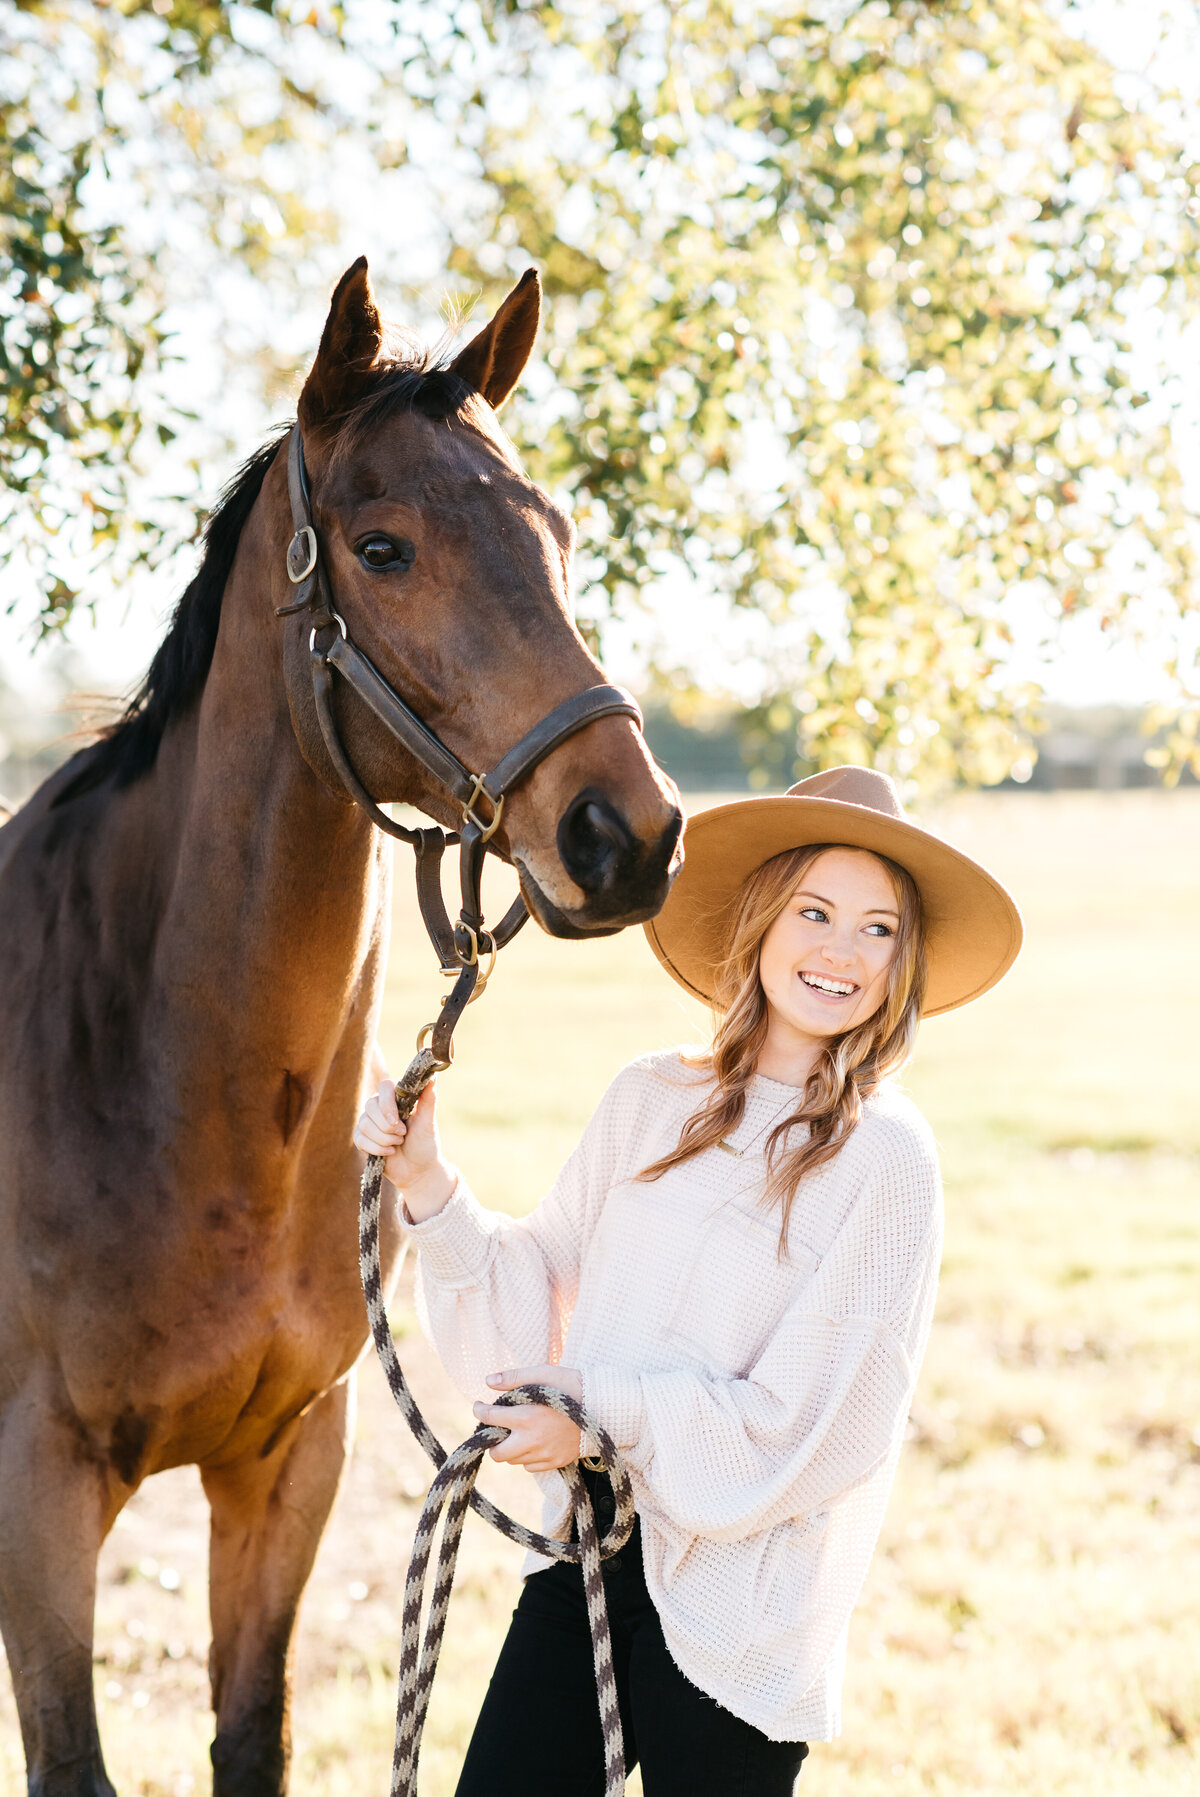 Senior and Equine Portraits at Stable View in Aiken SC